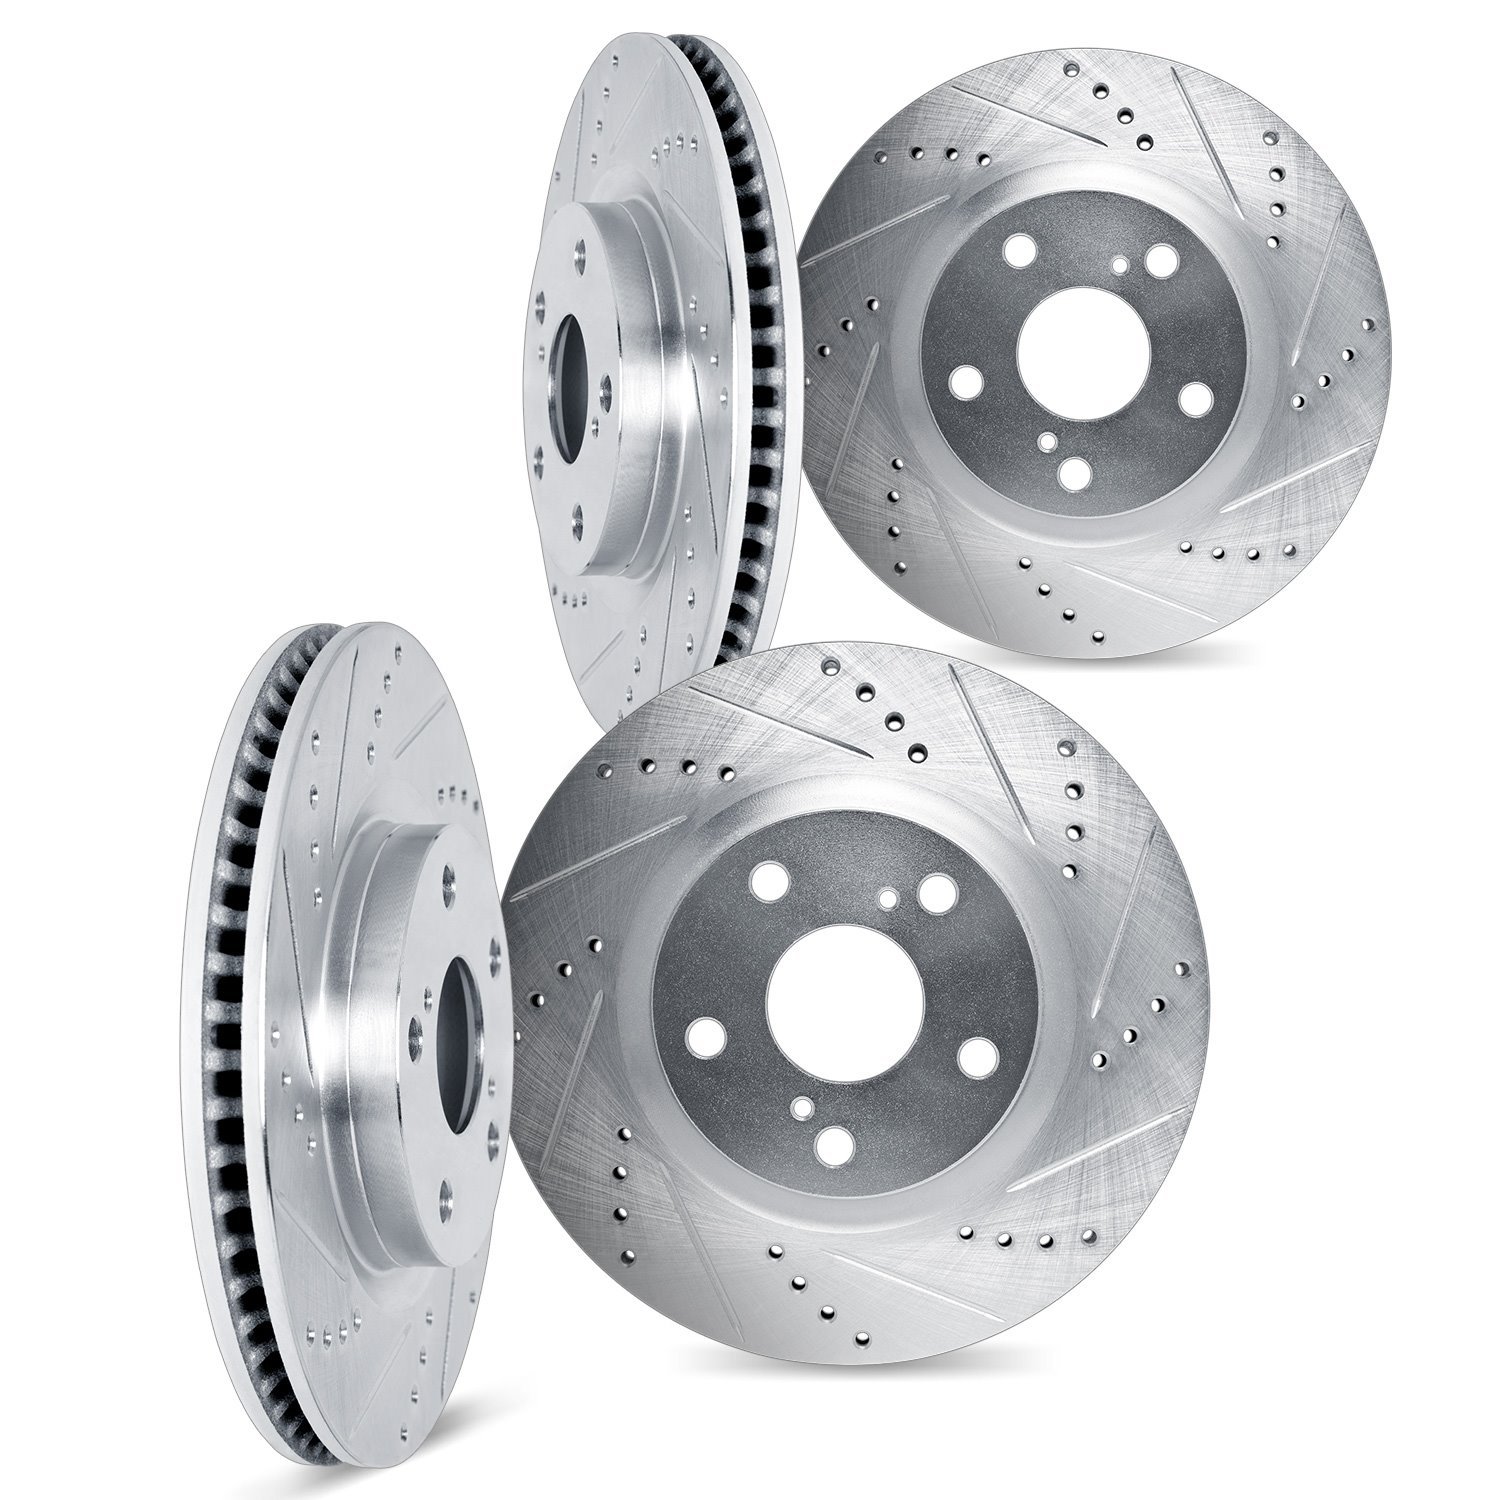 7004-75002 Drilled/Slotted Brake Rotors [Silver], Fits Select Lexus/Toyota/Scion, Position: Front and Rear